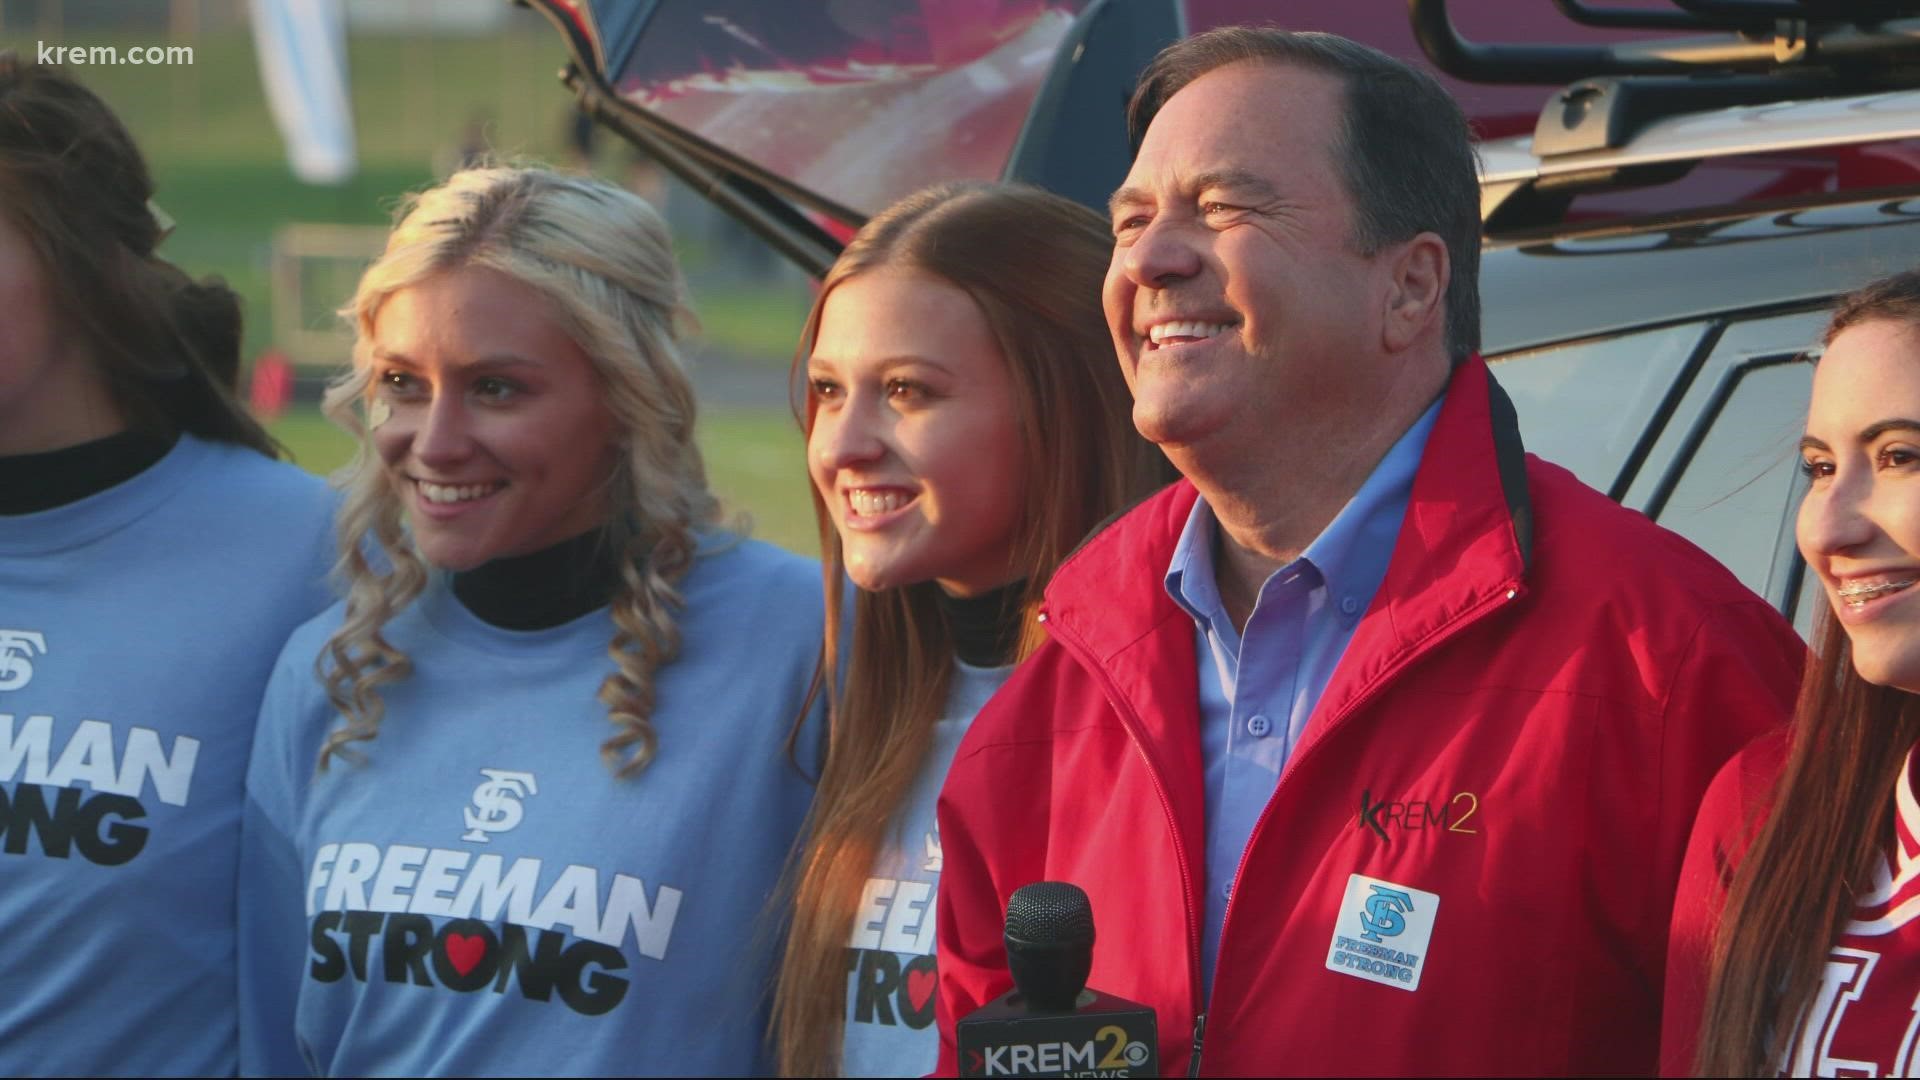 Tom reminisces on one of his most meaningful Tom's Tailgates, when he visited Freeman High School shortly after a deadly shooting.